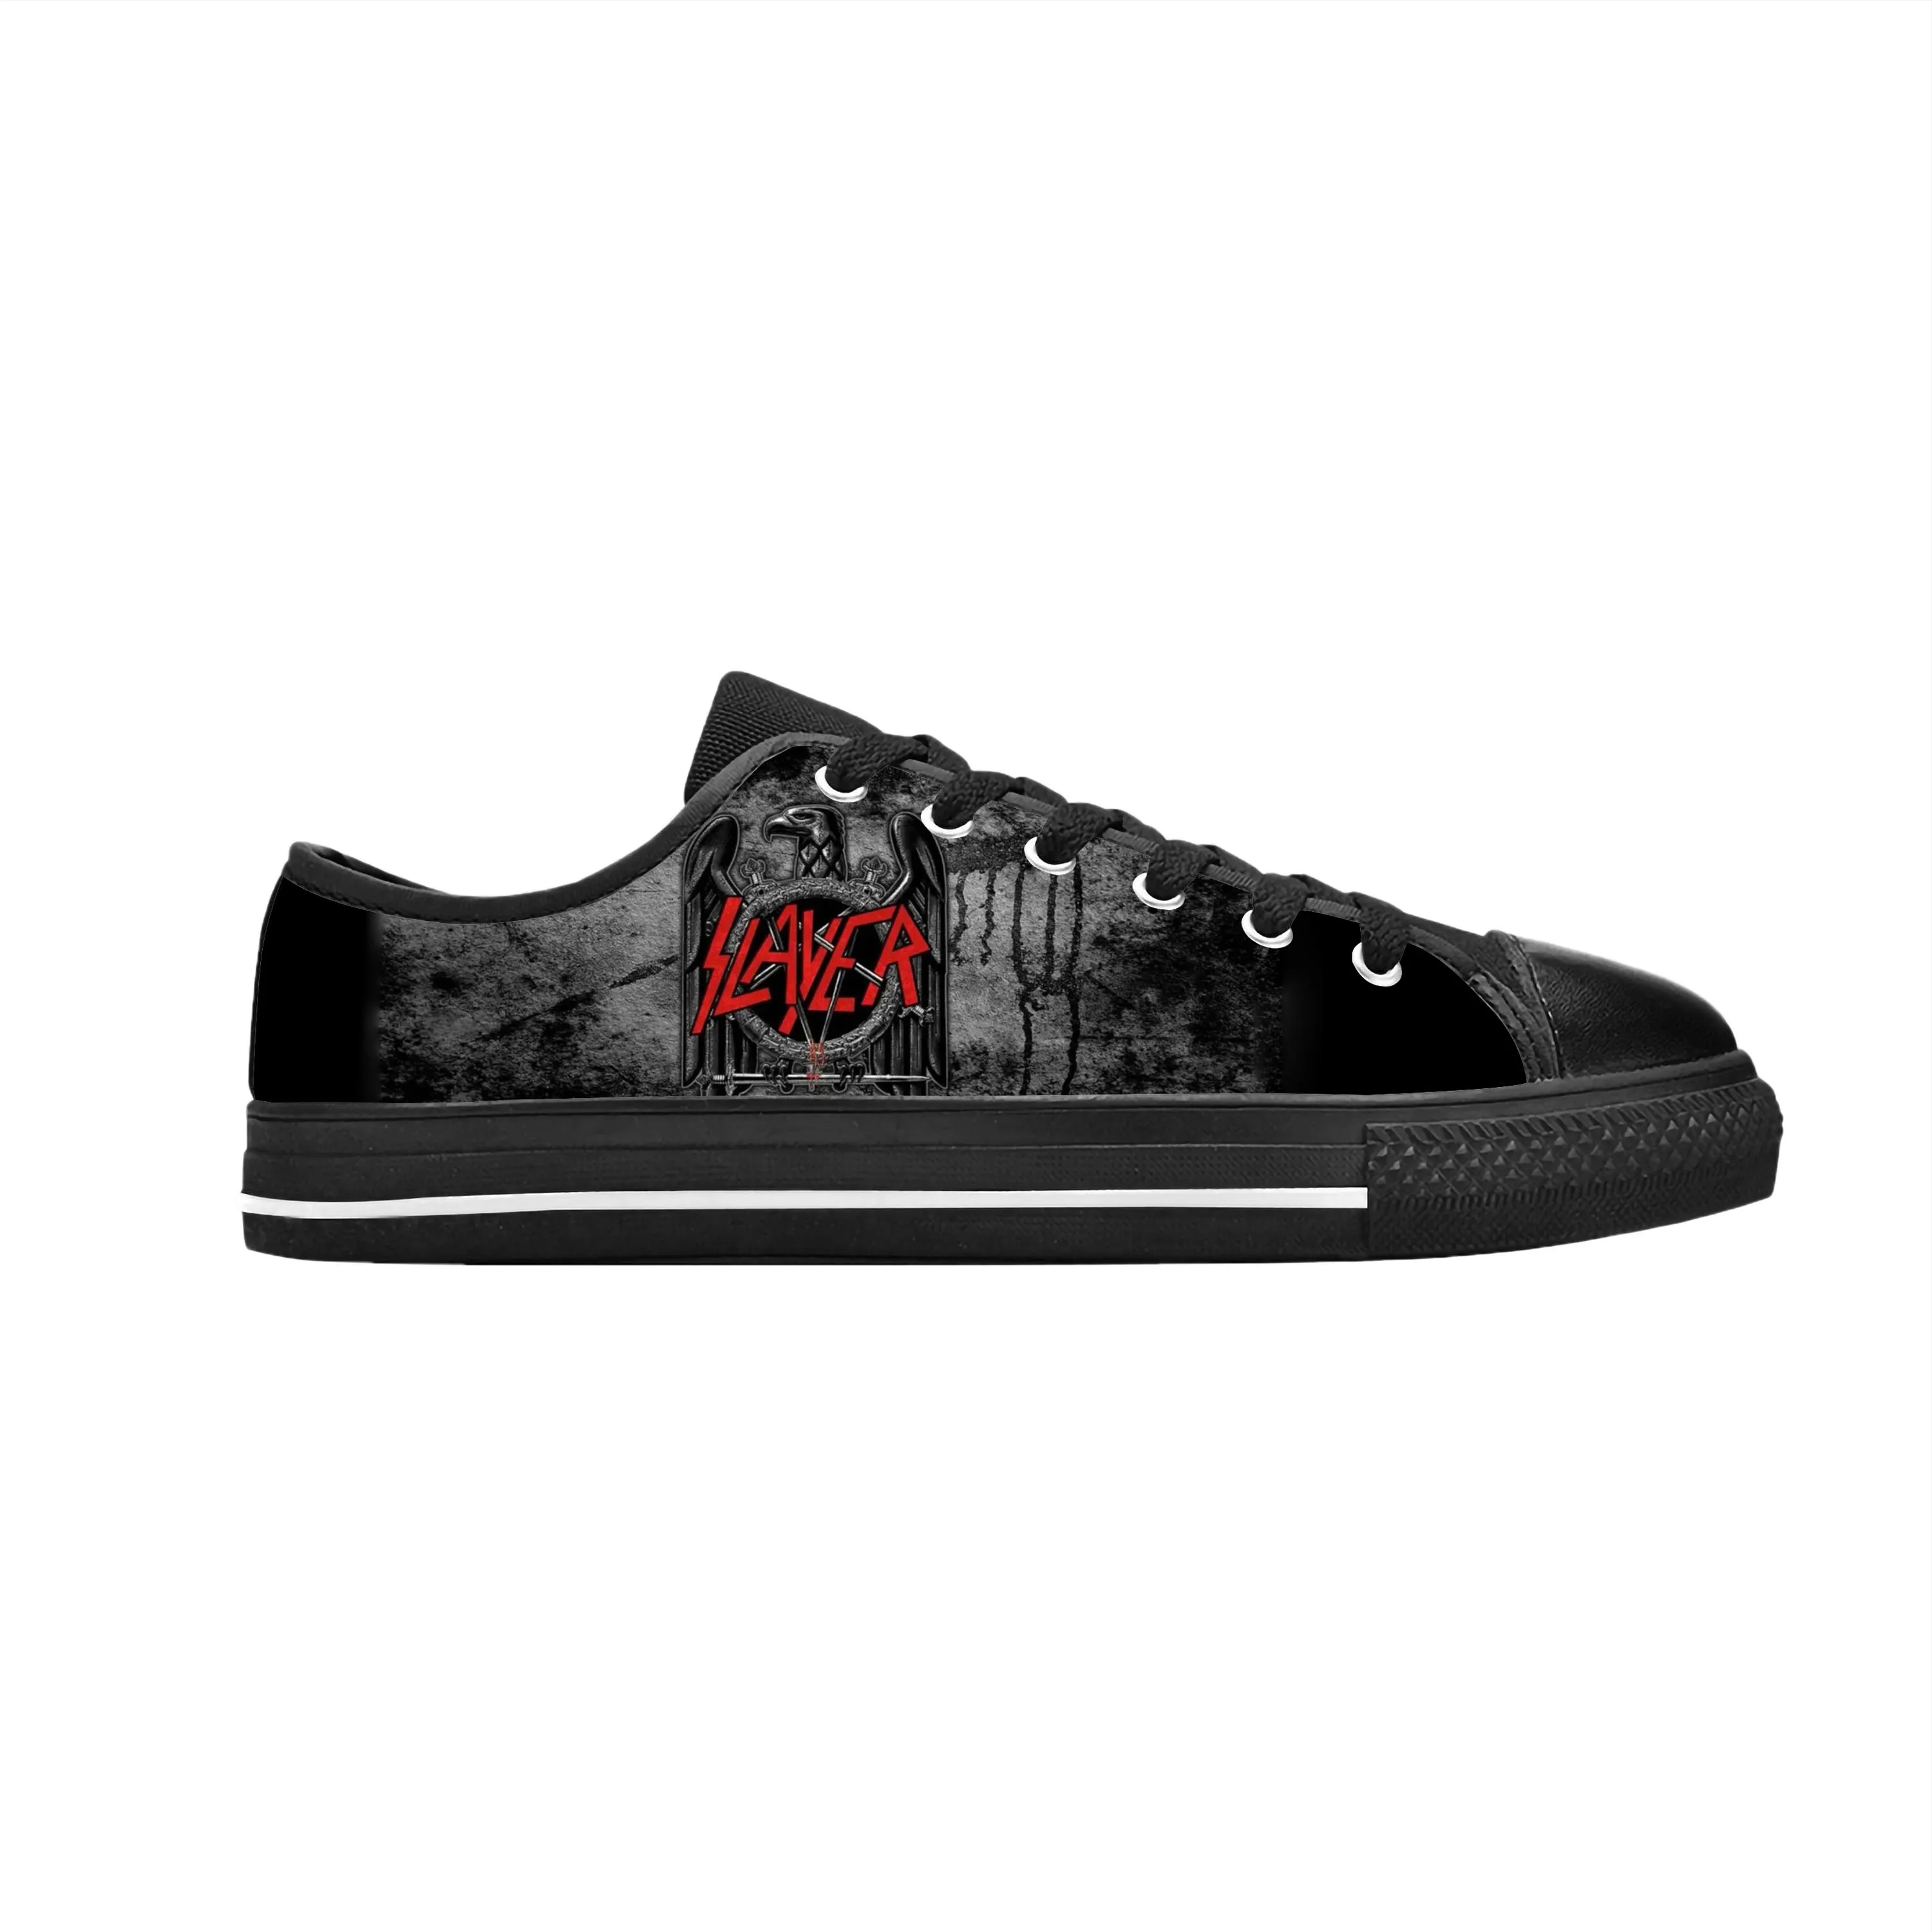 

Heavy Metal Band Rock Music Singer Slayer Horror Casual Cloth Shoes Low Top Comfortable Breathable 3D Print Men Women Sneakers